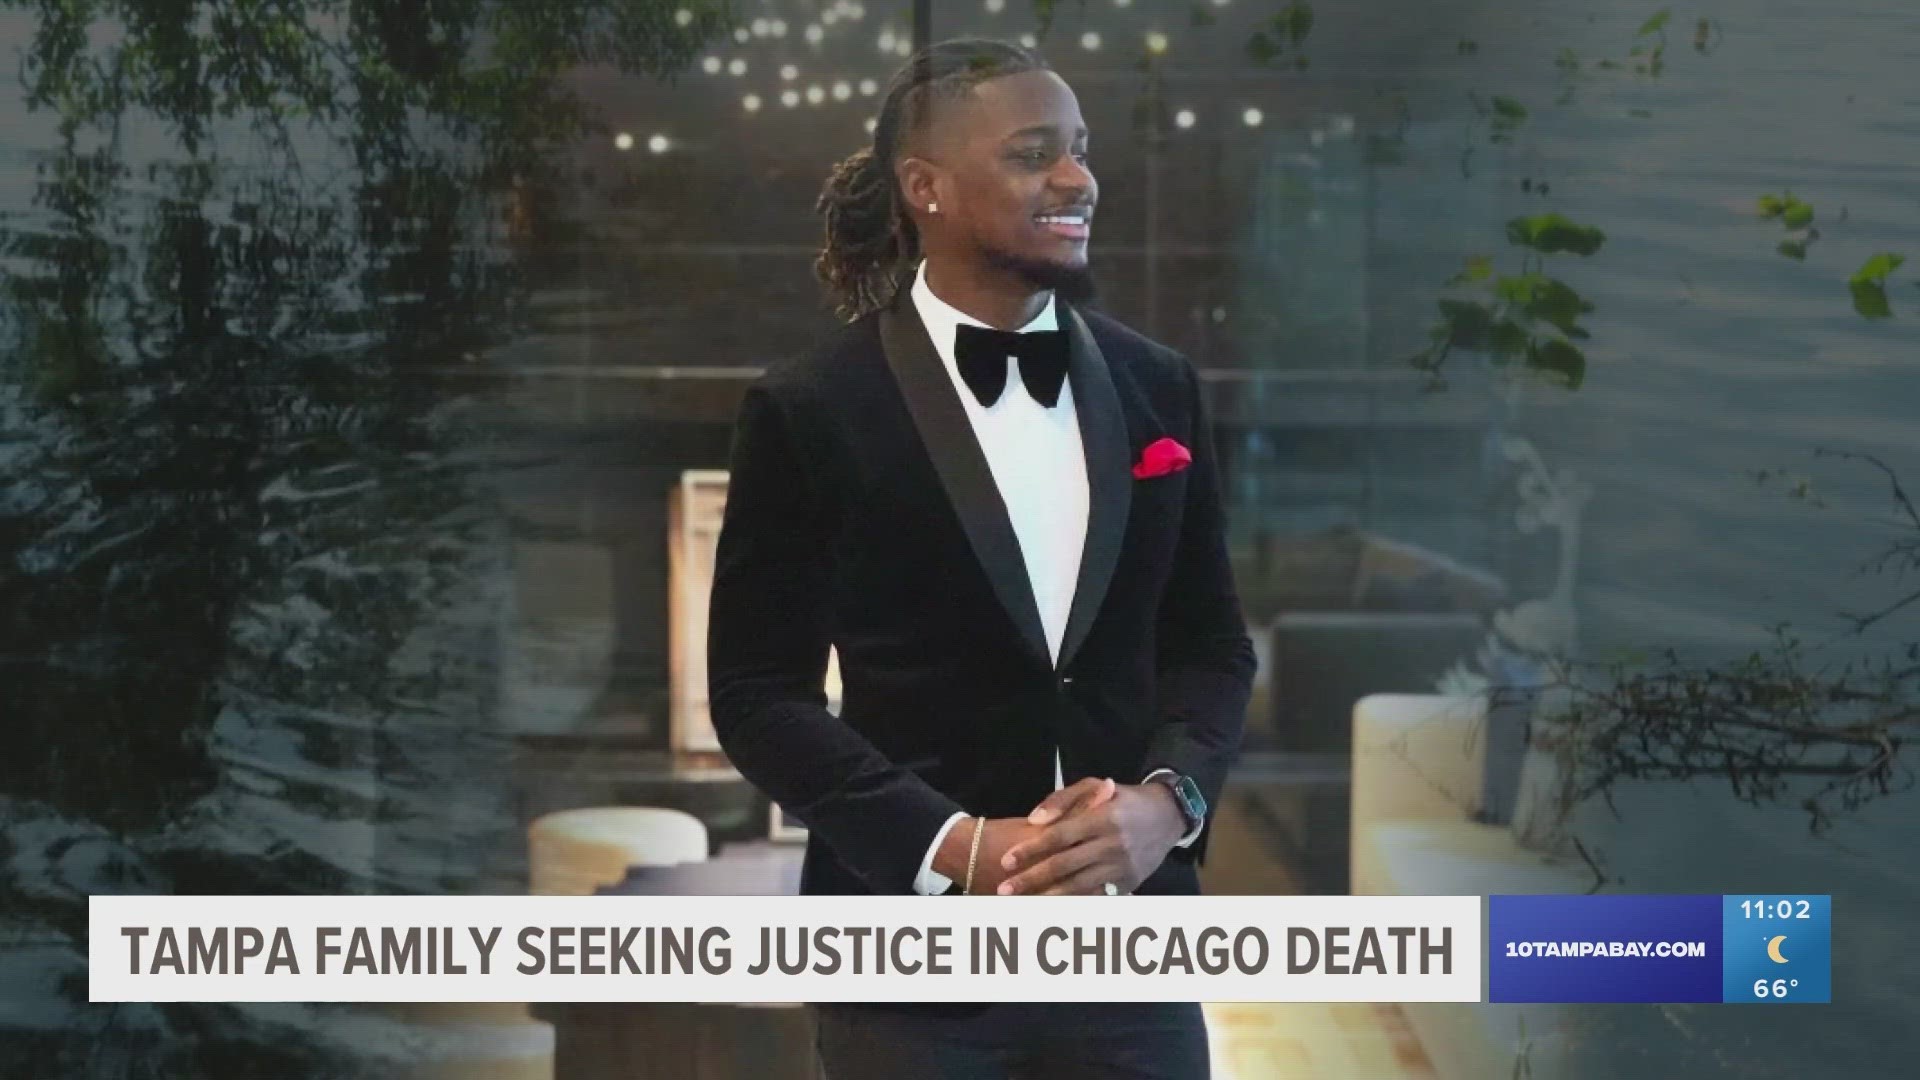 Abnerd Joseph was killed in his Chicago apartment building last September. His family is still waiting for answers.